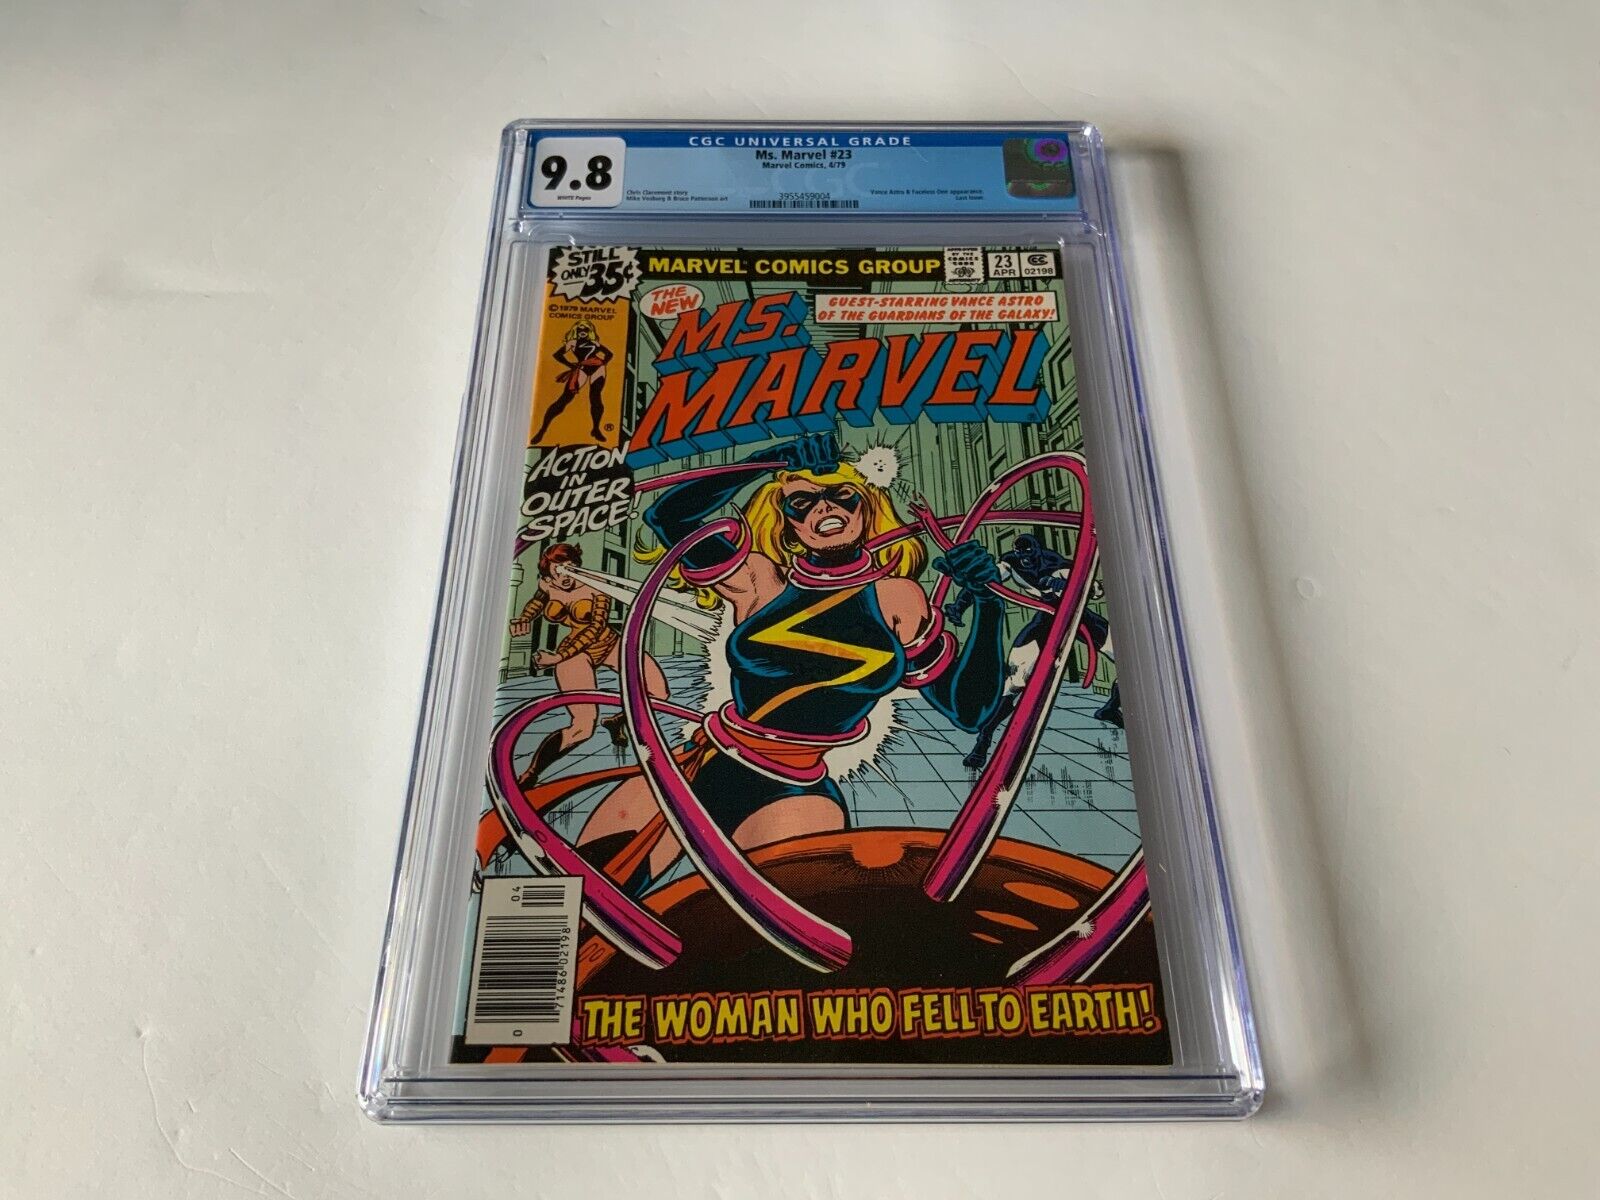 MS. MARVEL 23 CGC 9.8 NEWSSTAND WHITE PAGES VANCE ASTRO MARVEL COMIC 1979